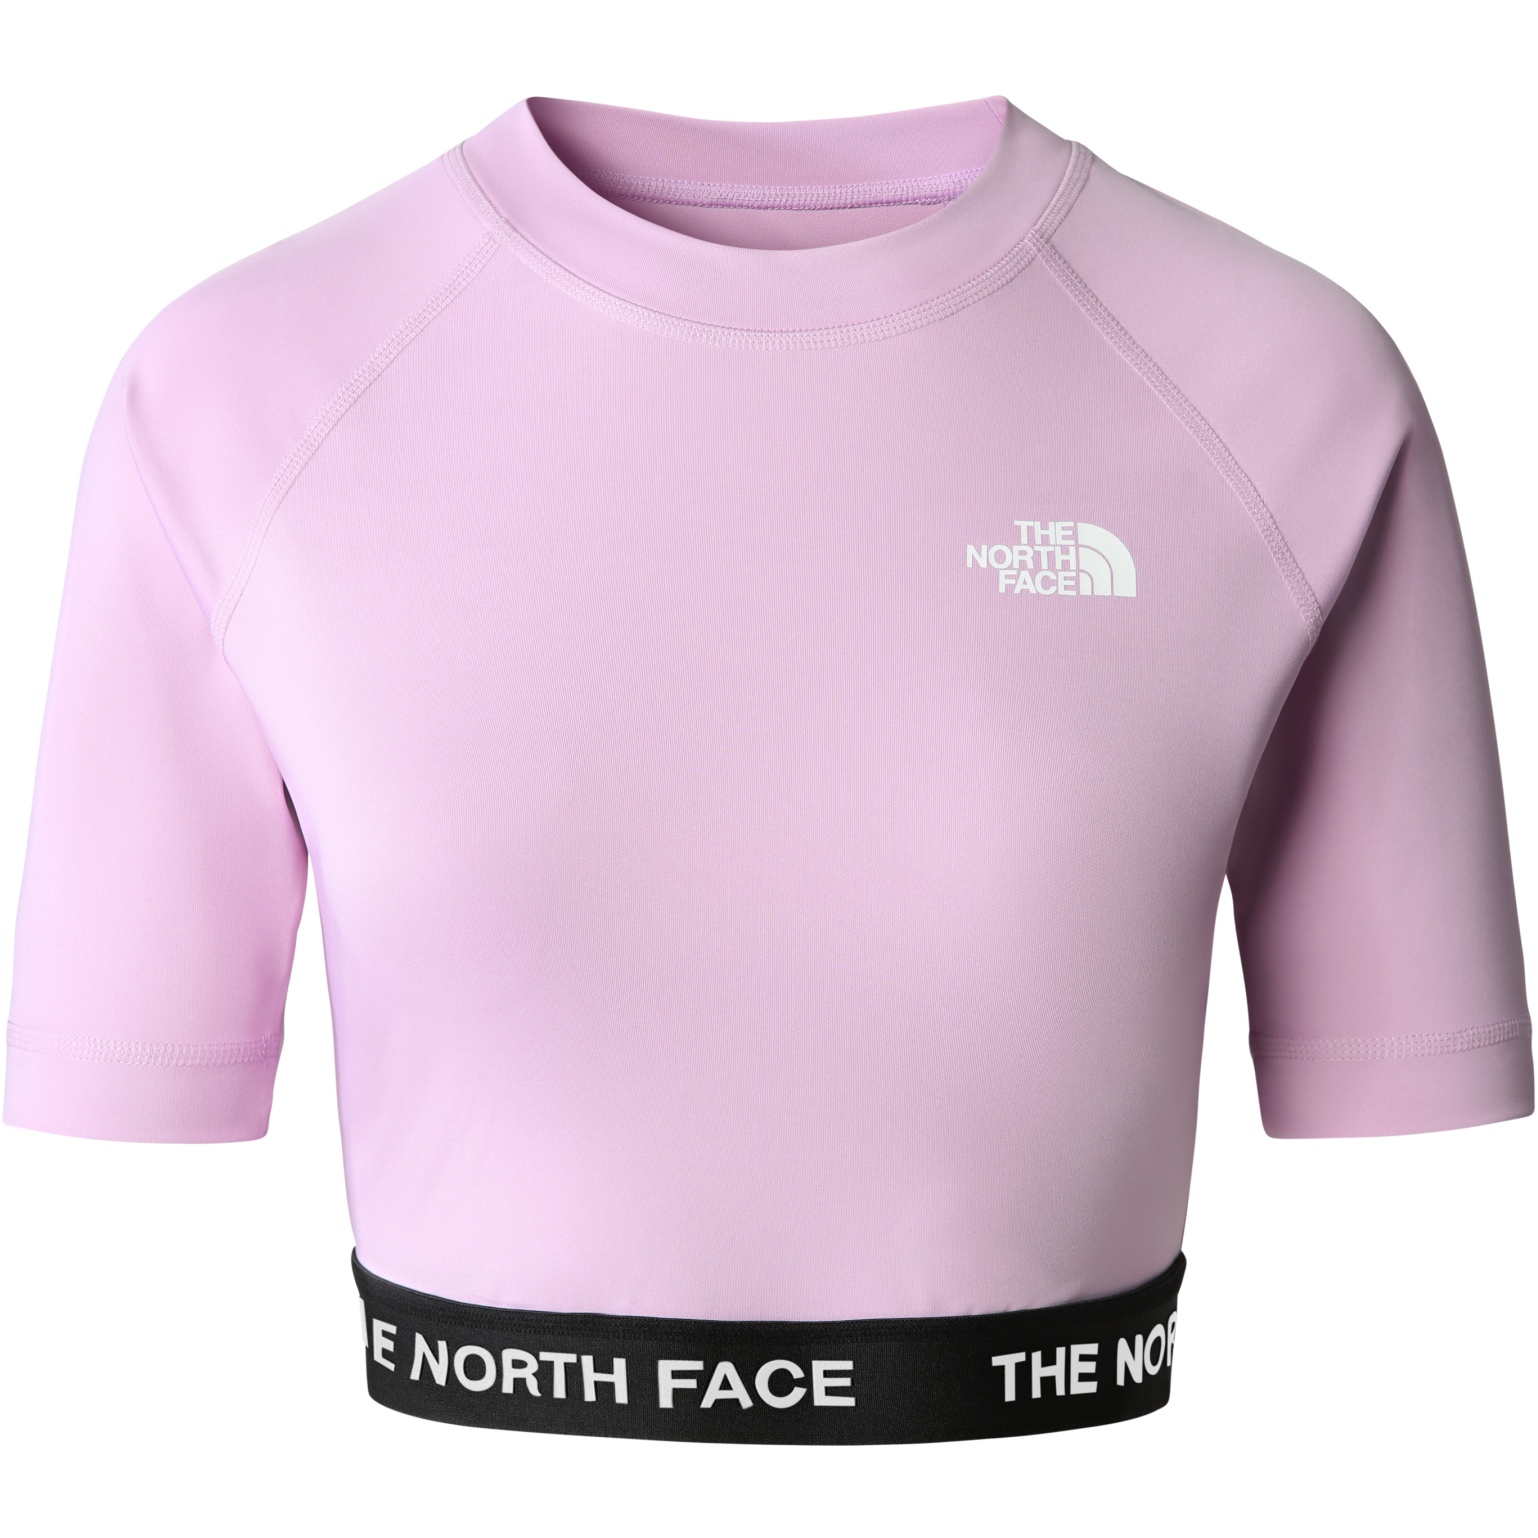 Image of The North Face Performance Crop Short Sleeve Tee Women - Lupine